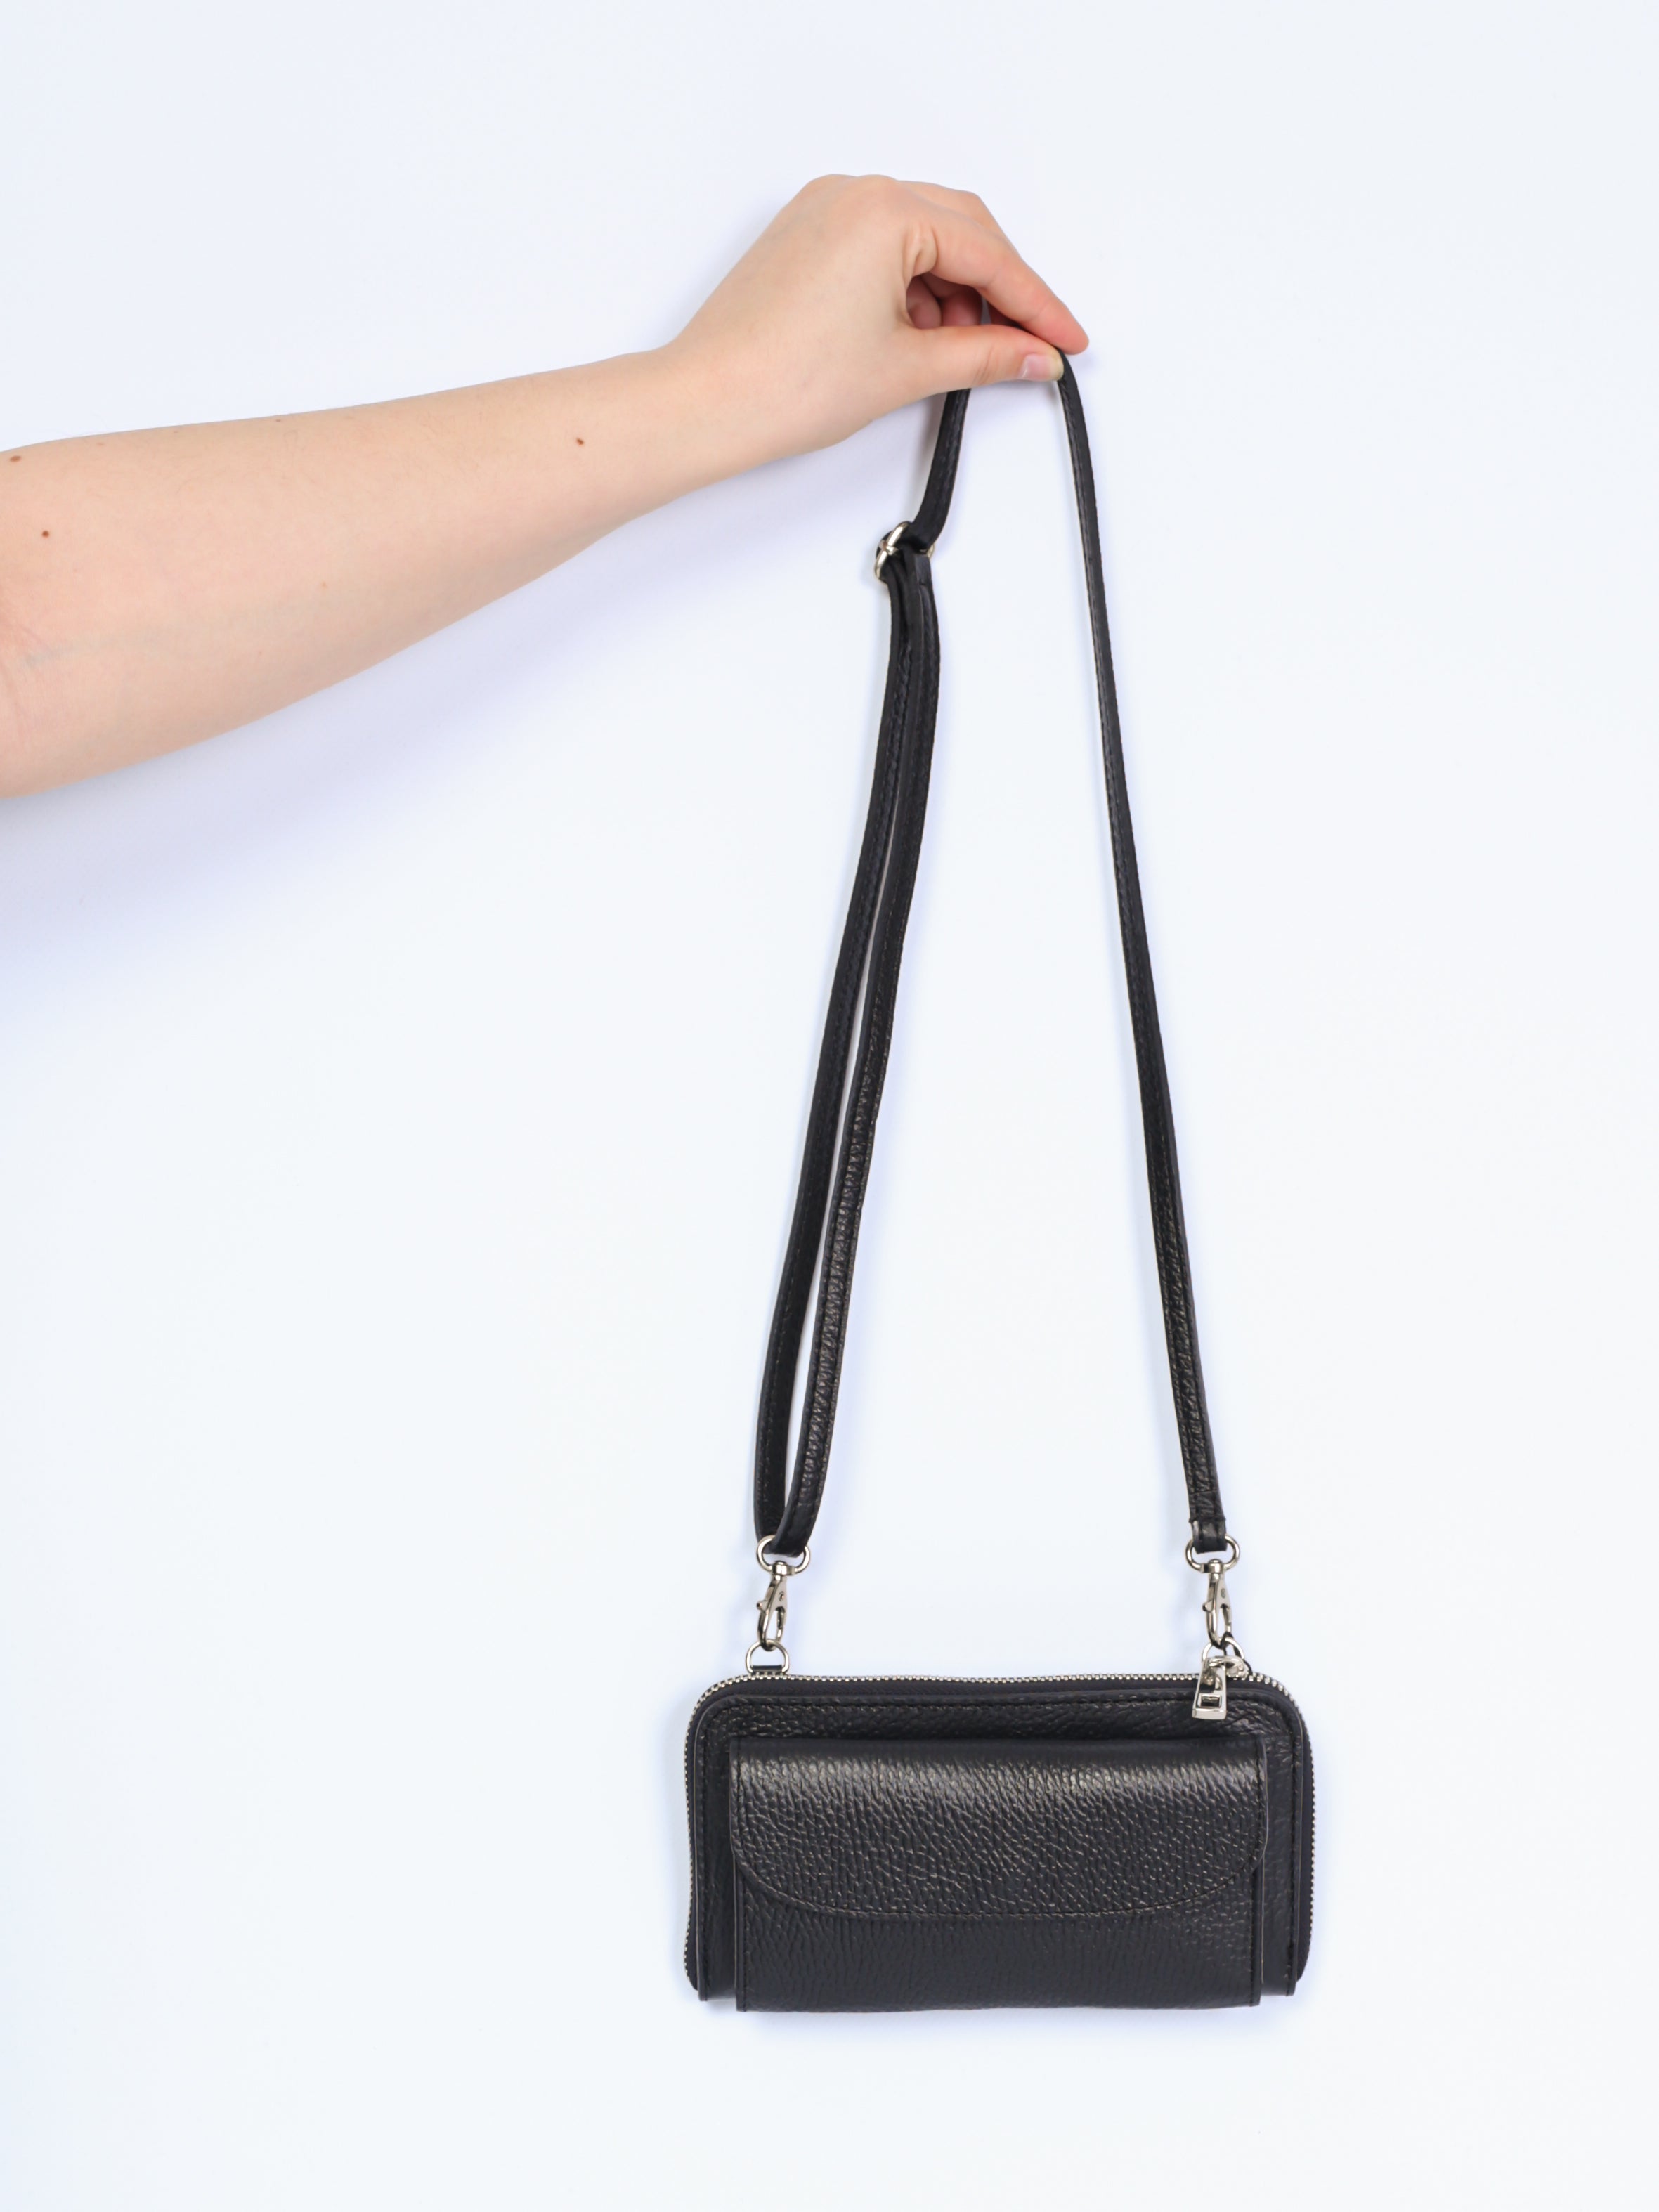 Purse with strap